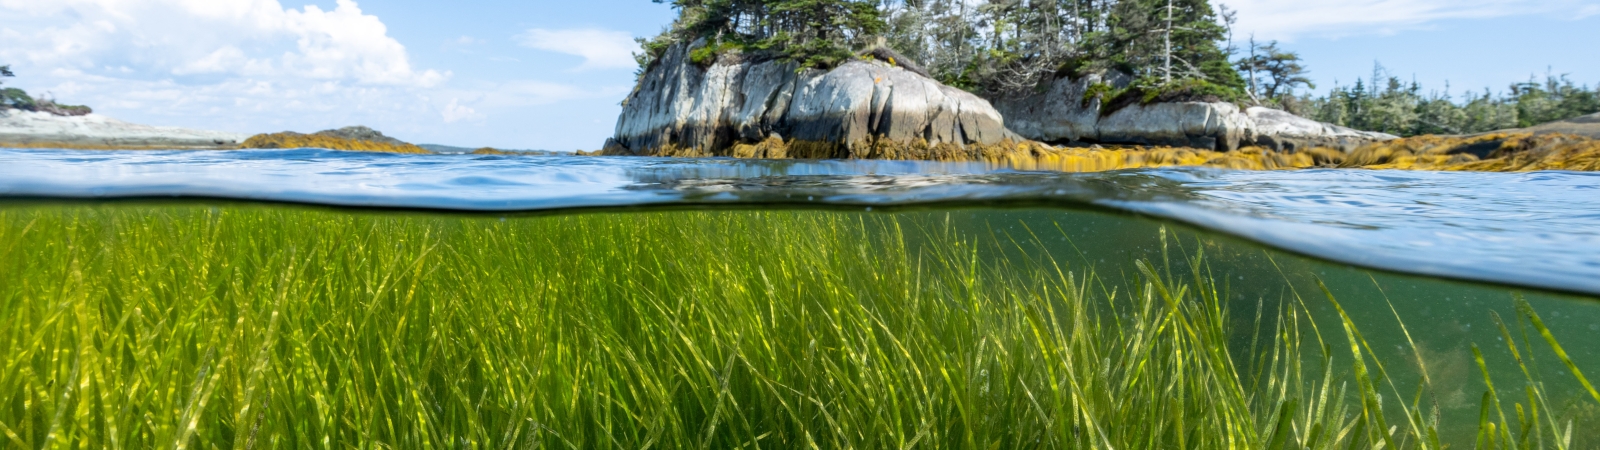 Eelgrass meadow taken with a water camera where you can see blue skies above the ocean and a small rock island with pine trees on it.